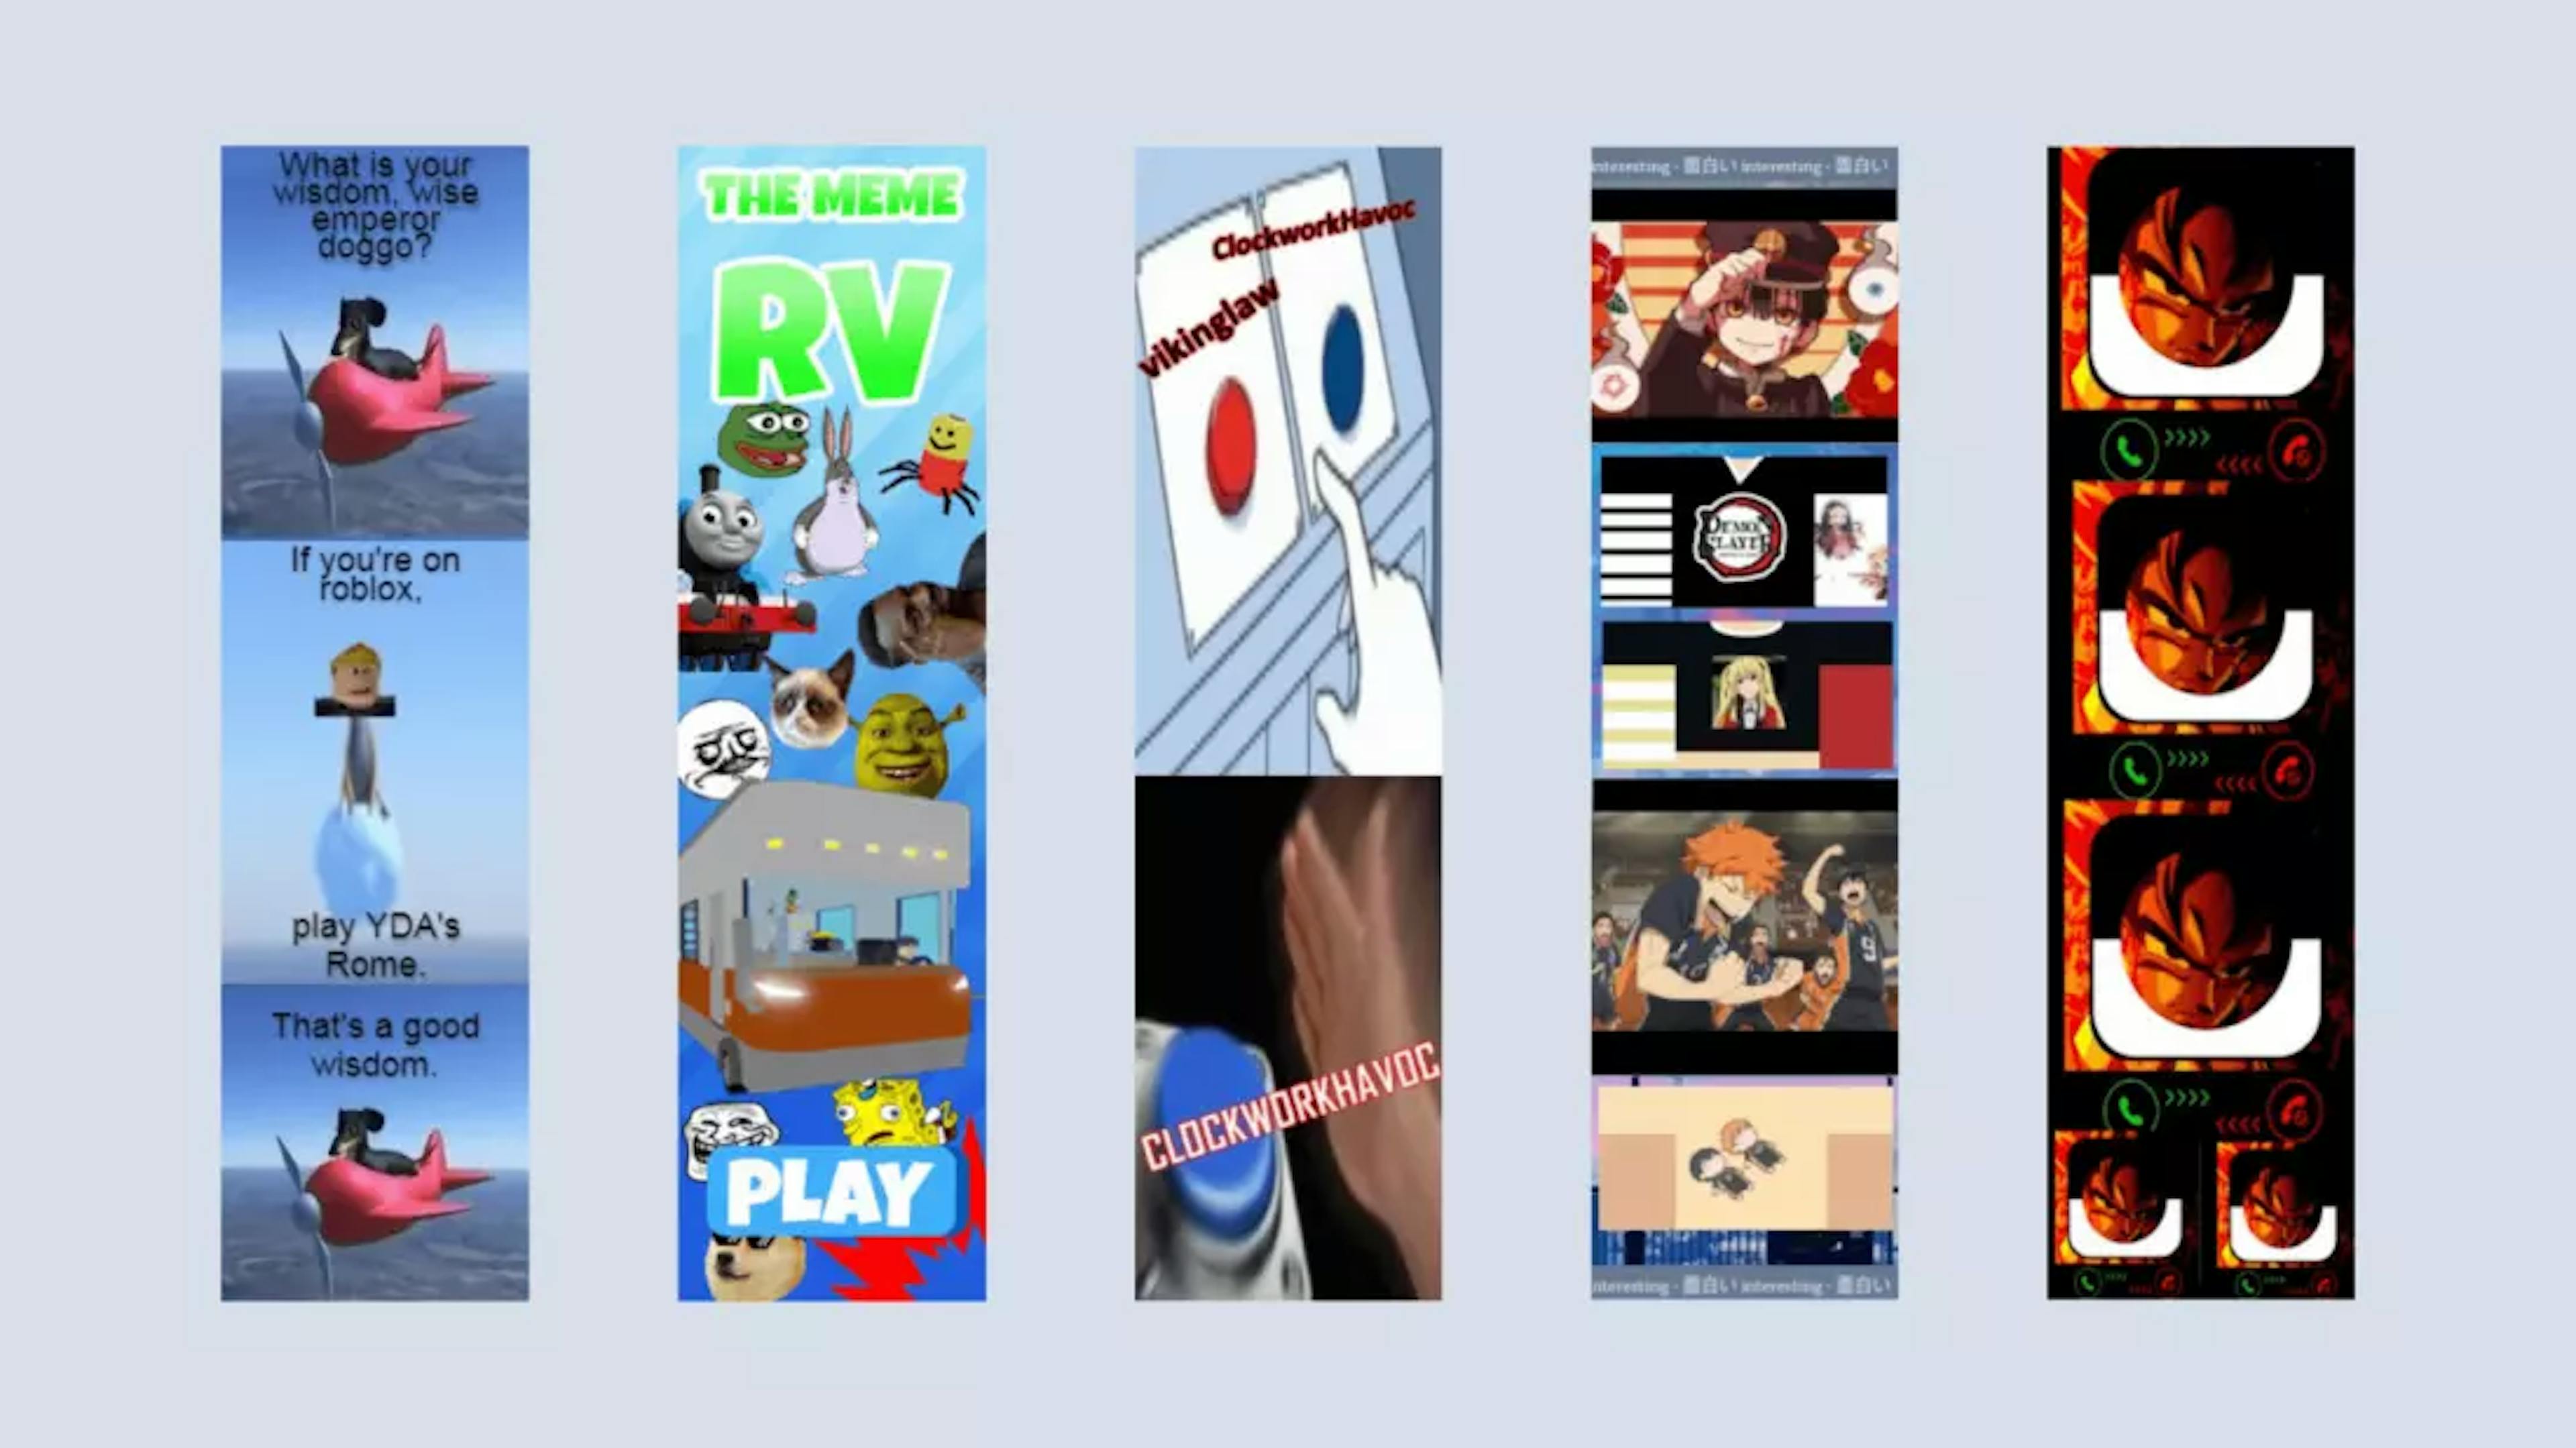 Examples of Roblox user ads